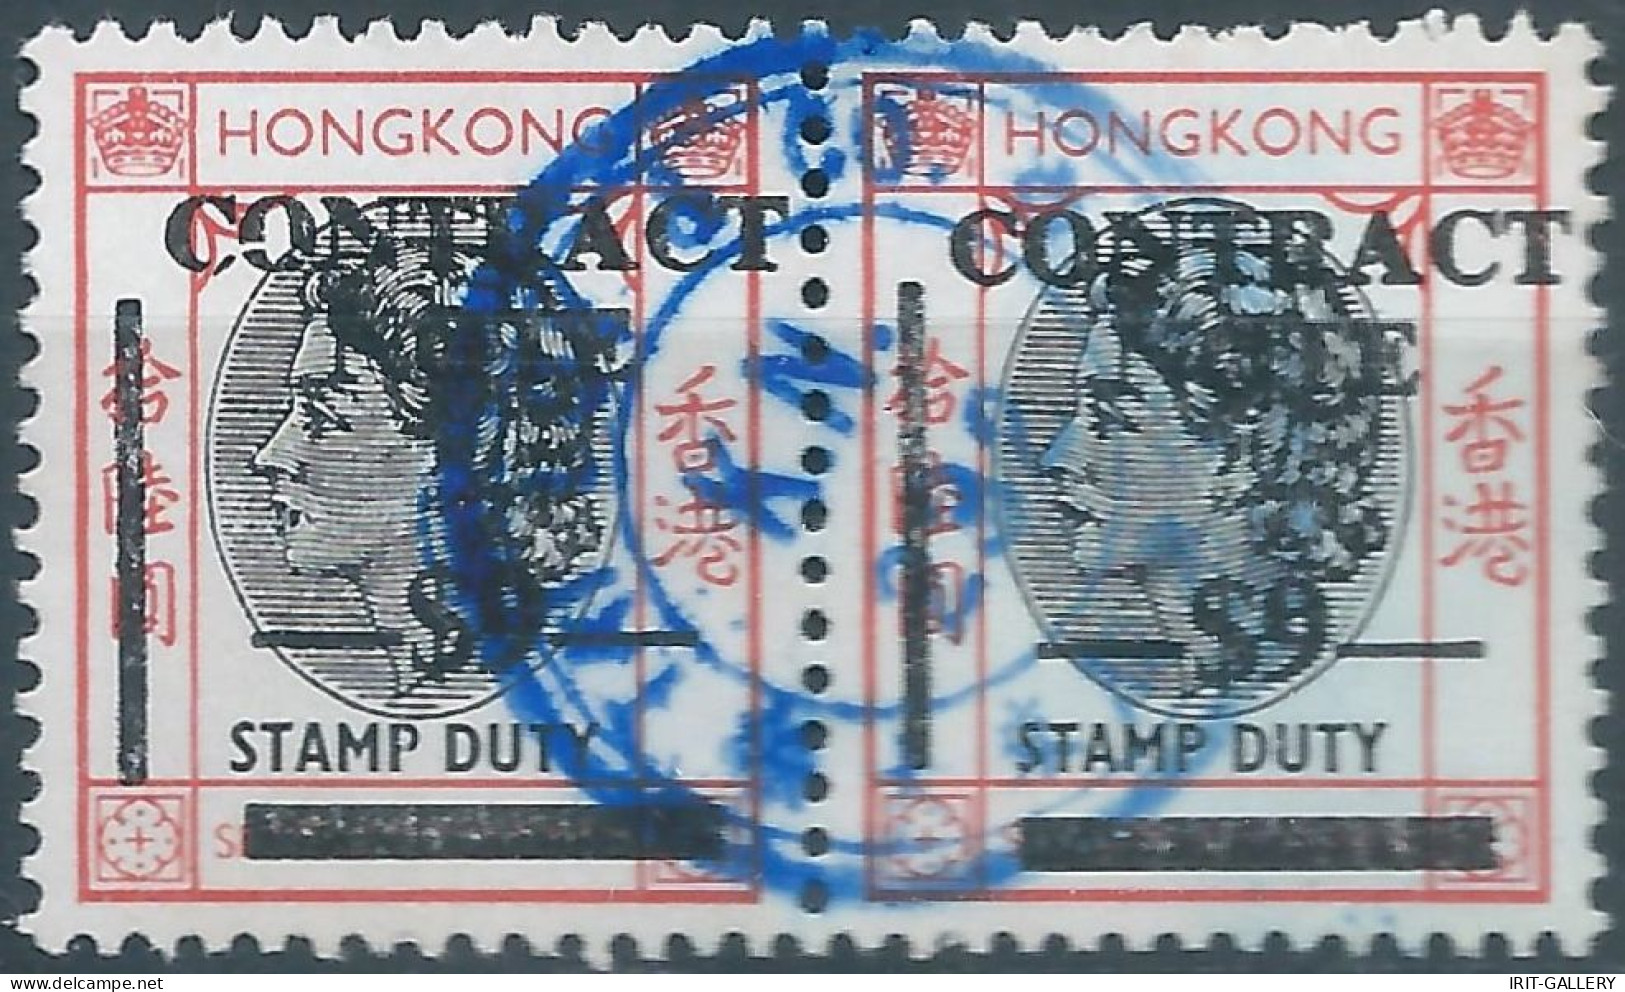 Great Britain-ENGLAND,HONG KONG Revenue Stamp DUTY Contract $9 In Pairs With The Central Cancelled - Stempelmarke Als Postmarke Verwendet